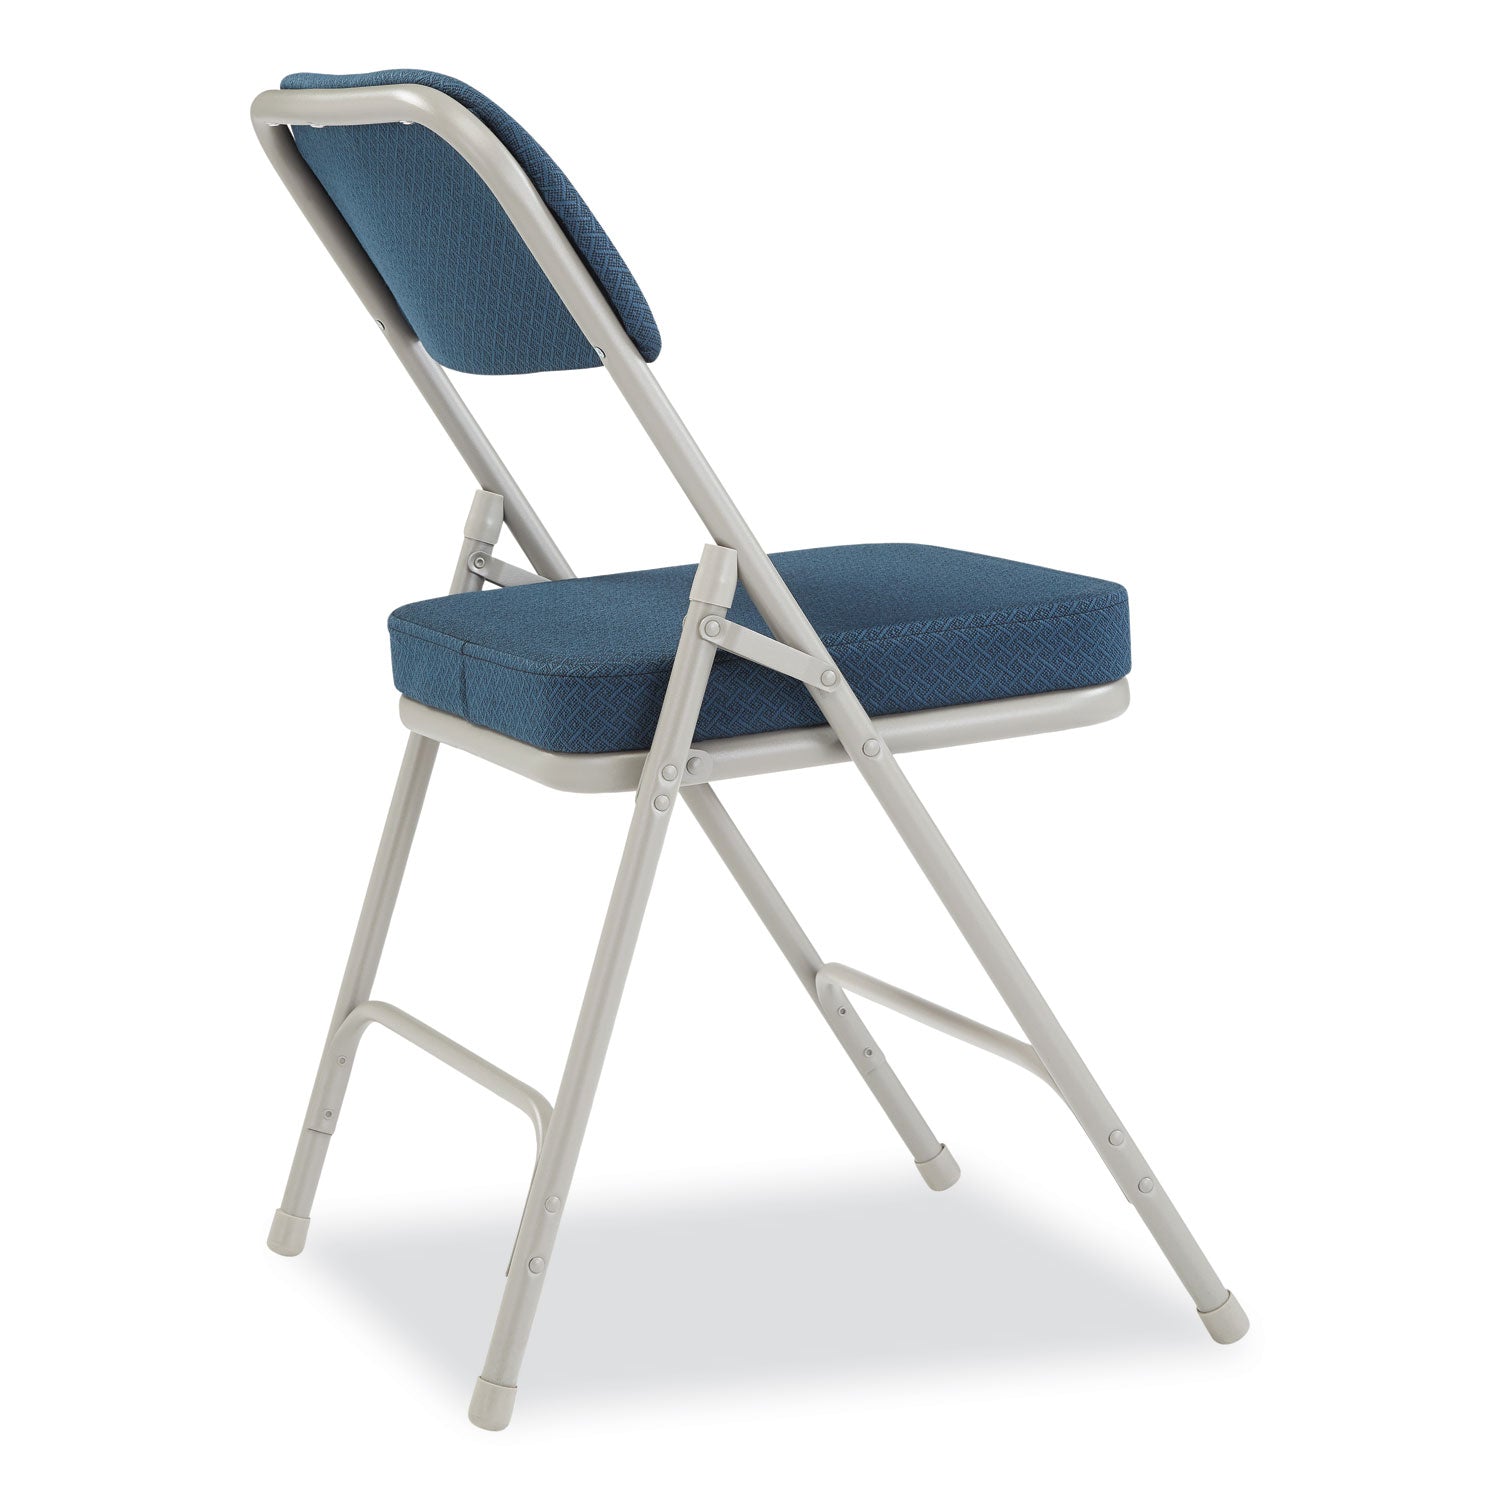 3200-series-fabric-dual-hinge-folding-chair-supports-300-lb-regal-blue-seat-back-gray-base-2-ct-ships-in-1-3-bus-days_nps3215 - 4